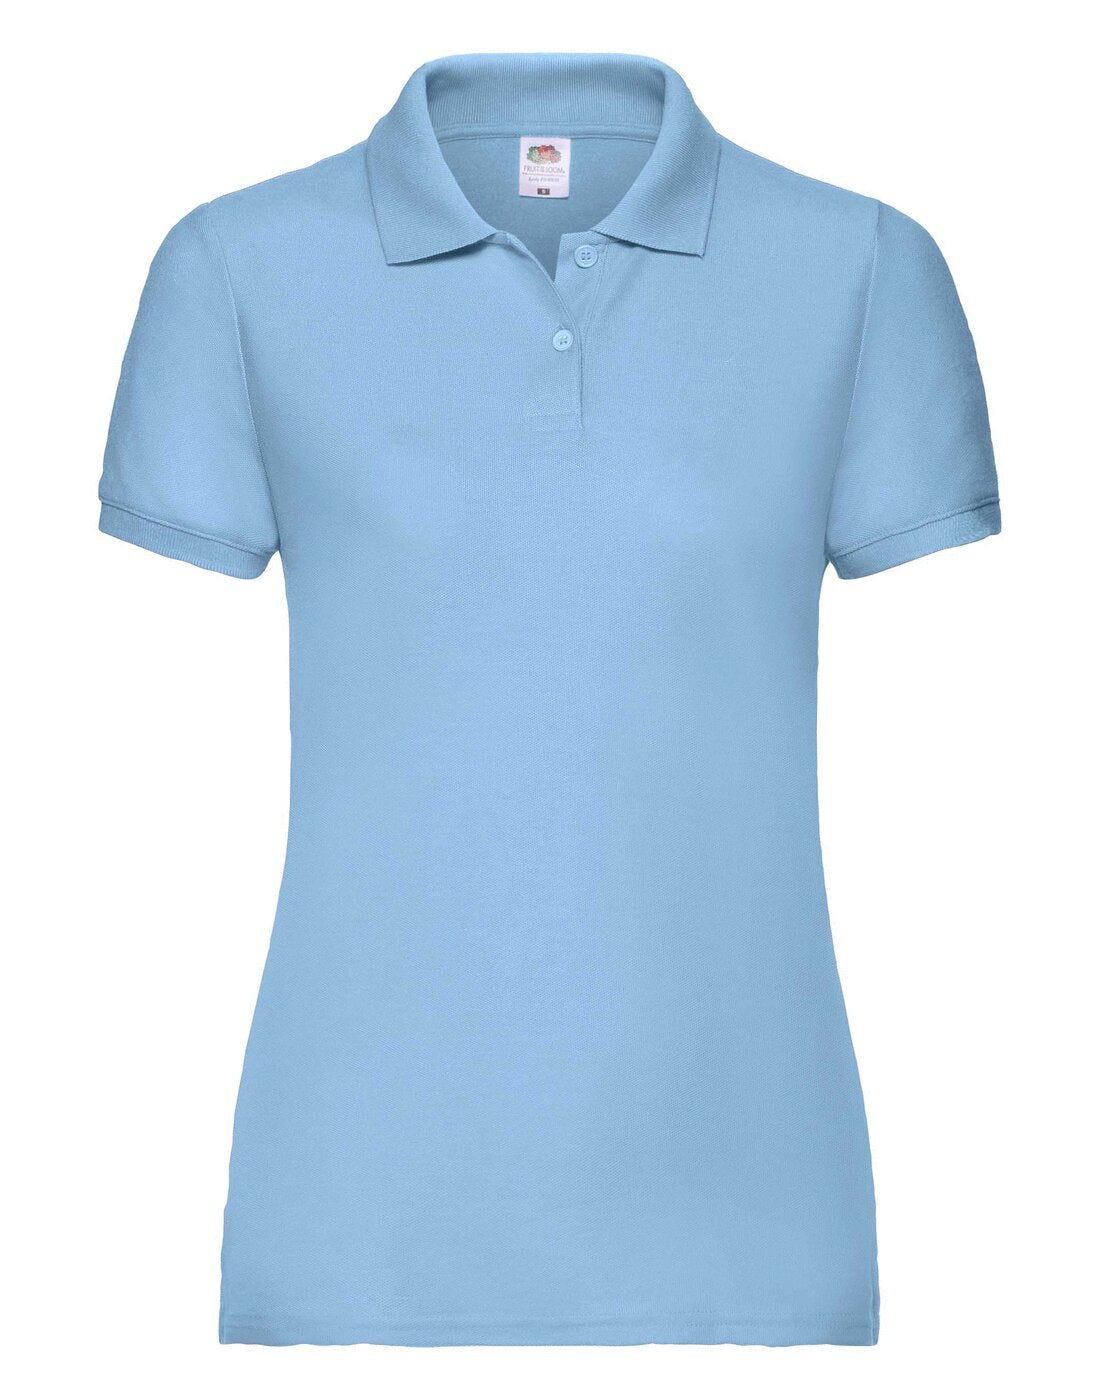 Fruit of the Loom Ladies 65/35 Polo - Sky Blue